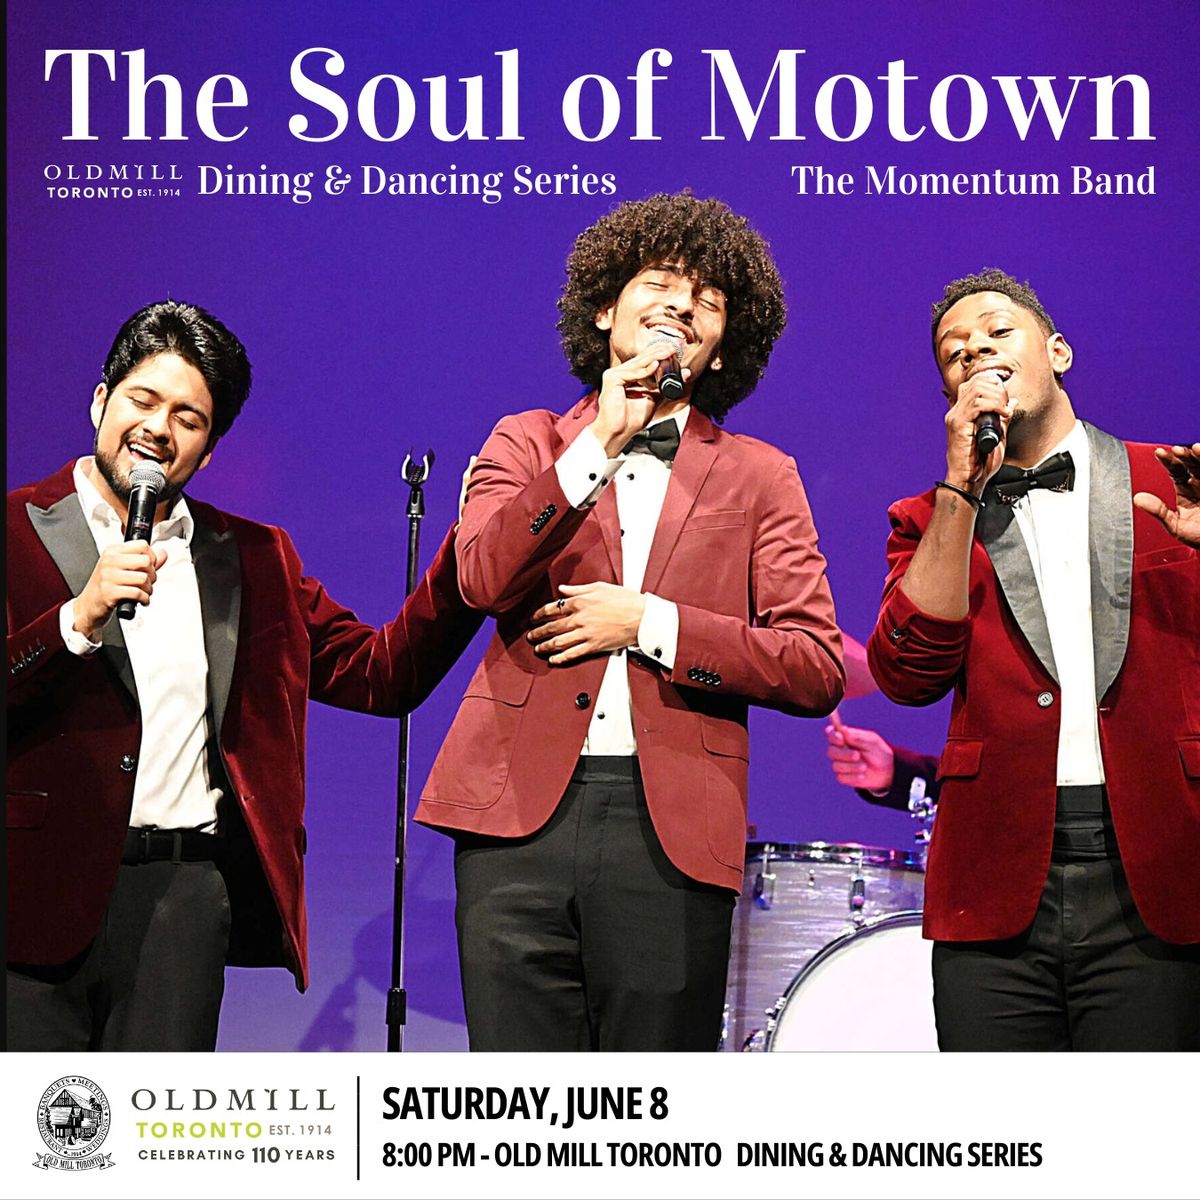 The Soul of Motown with The Momentum Band - Old Mill Toronto Dining & Dancing Series